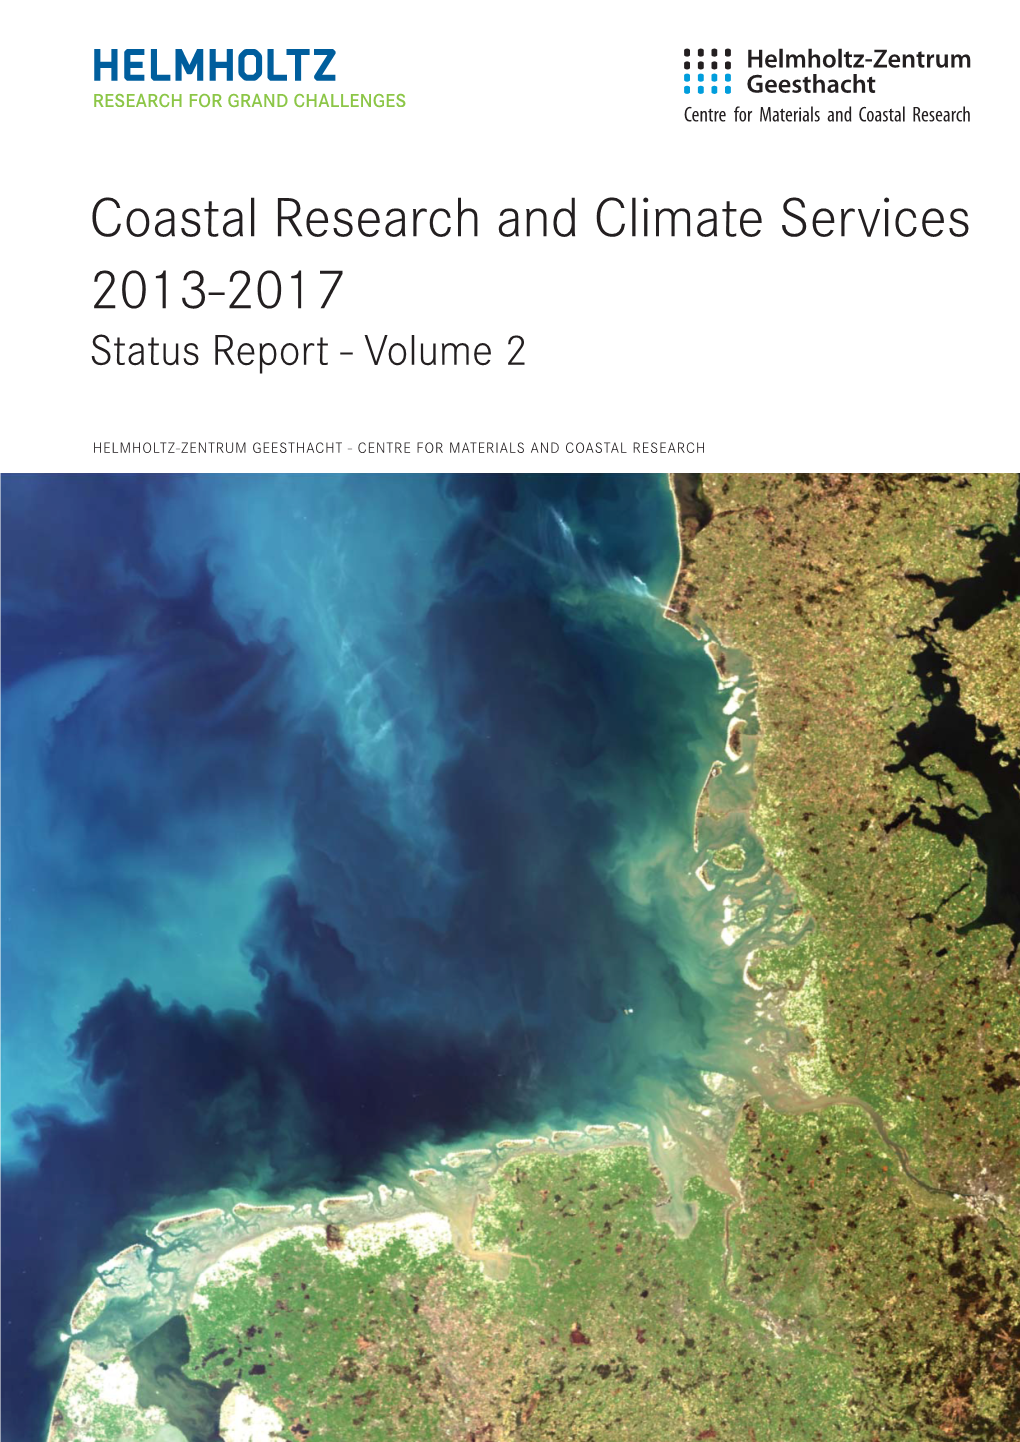 Coastal Research and Climate Services 2013-2017 Status Report - Volume 2